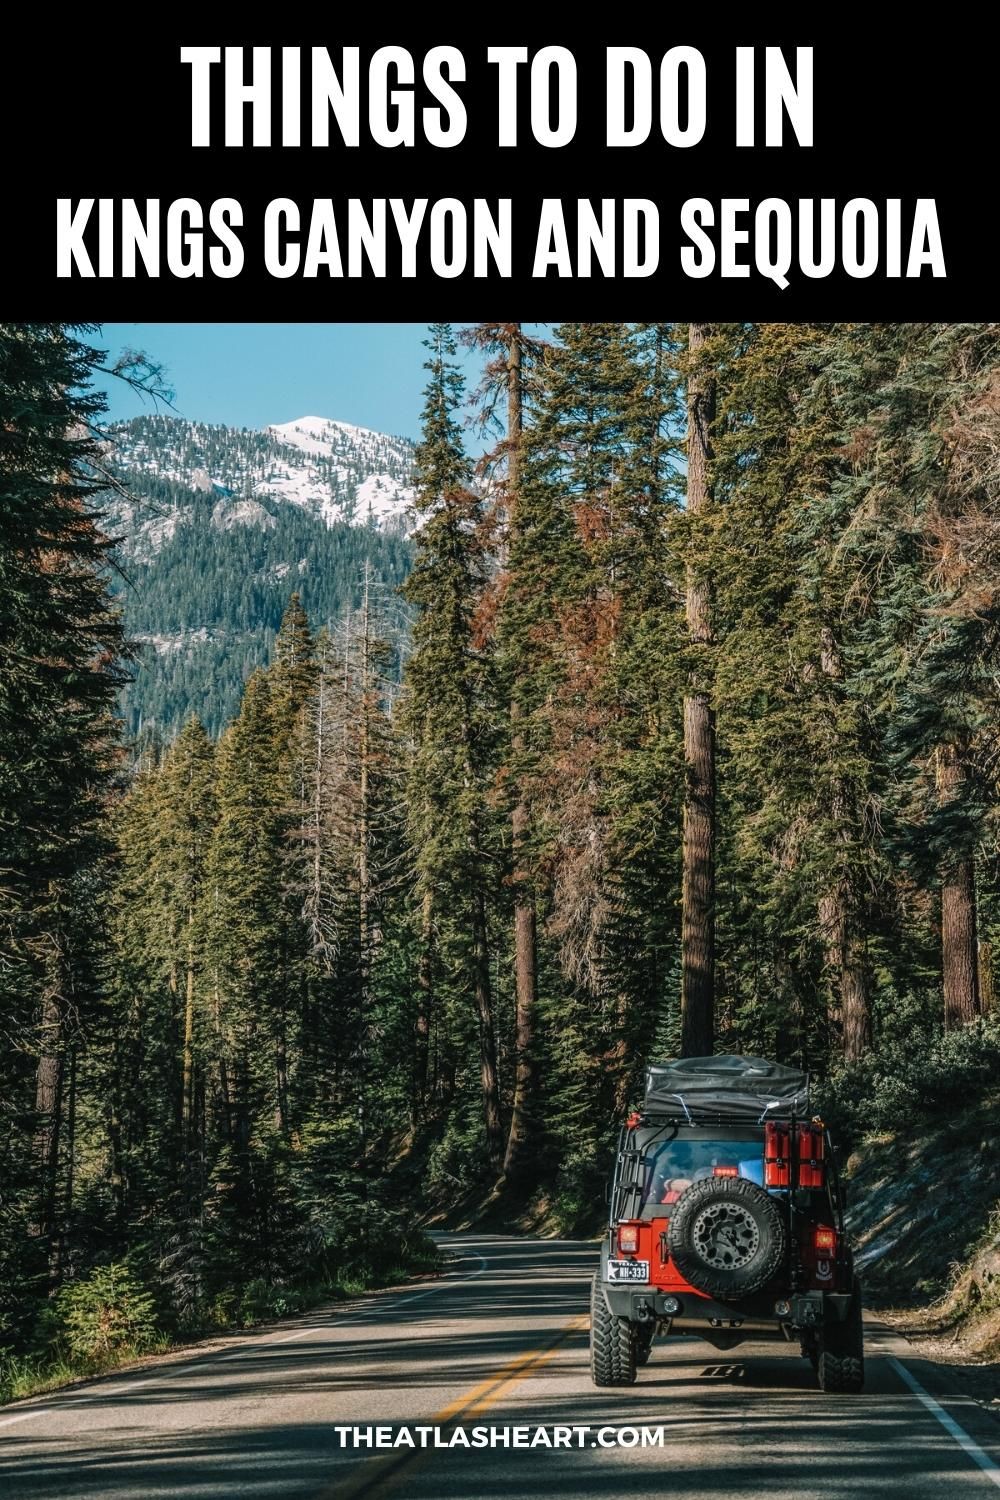 17 Fun & Best Things to do in Kings Canyon & Sequoia National Parks